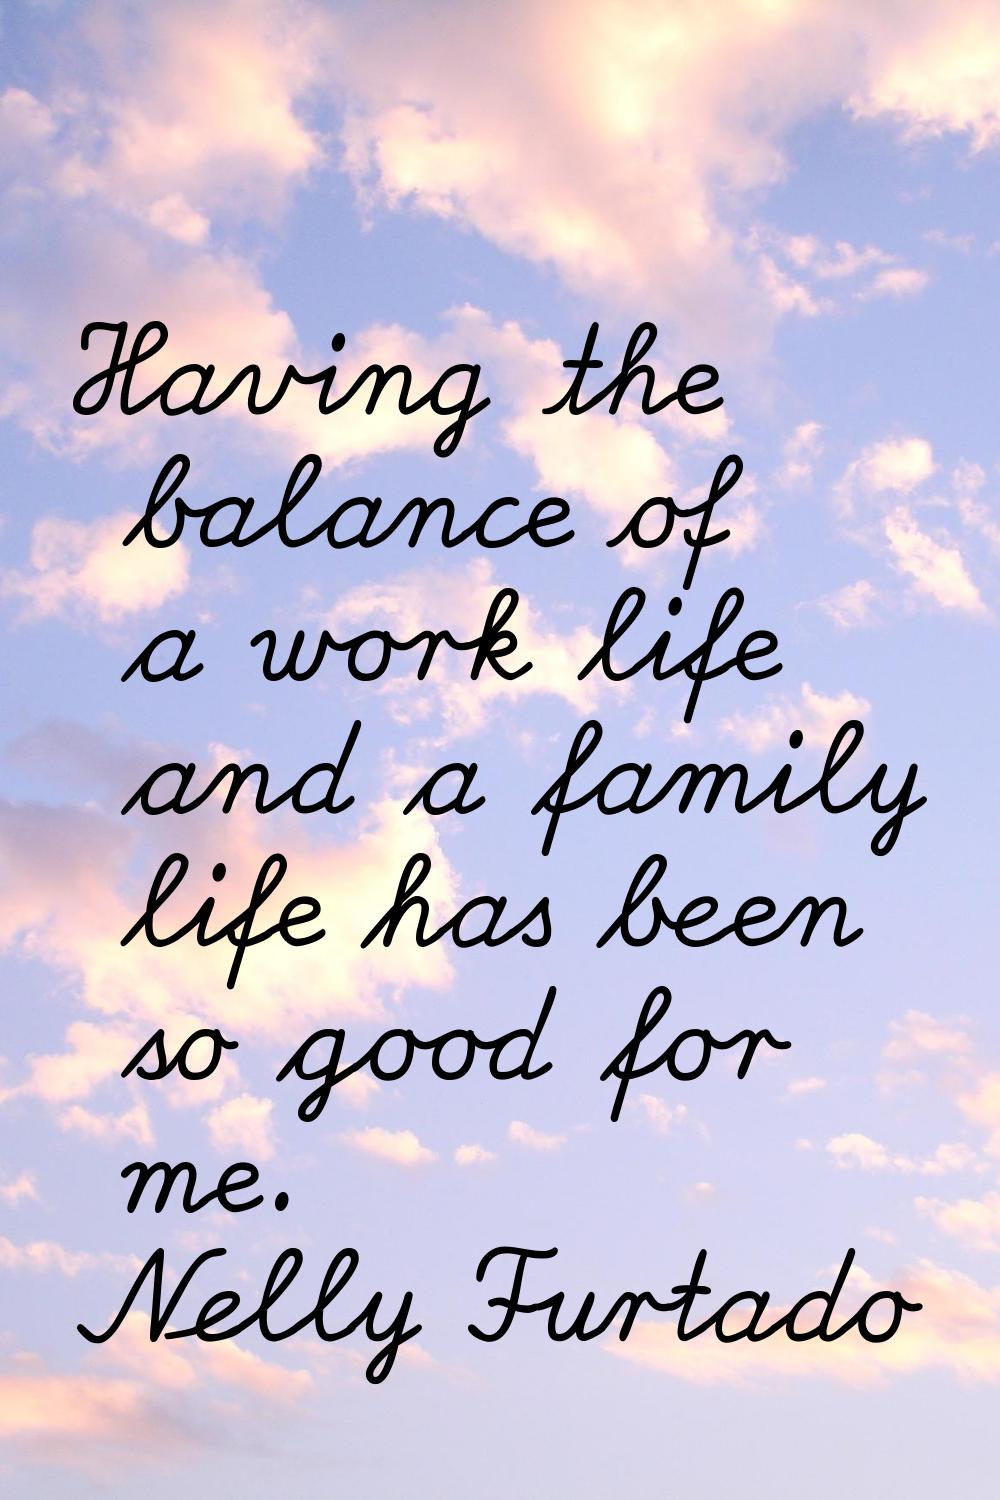 Having the balance of a work life and a family life has been so good for me.